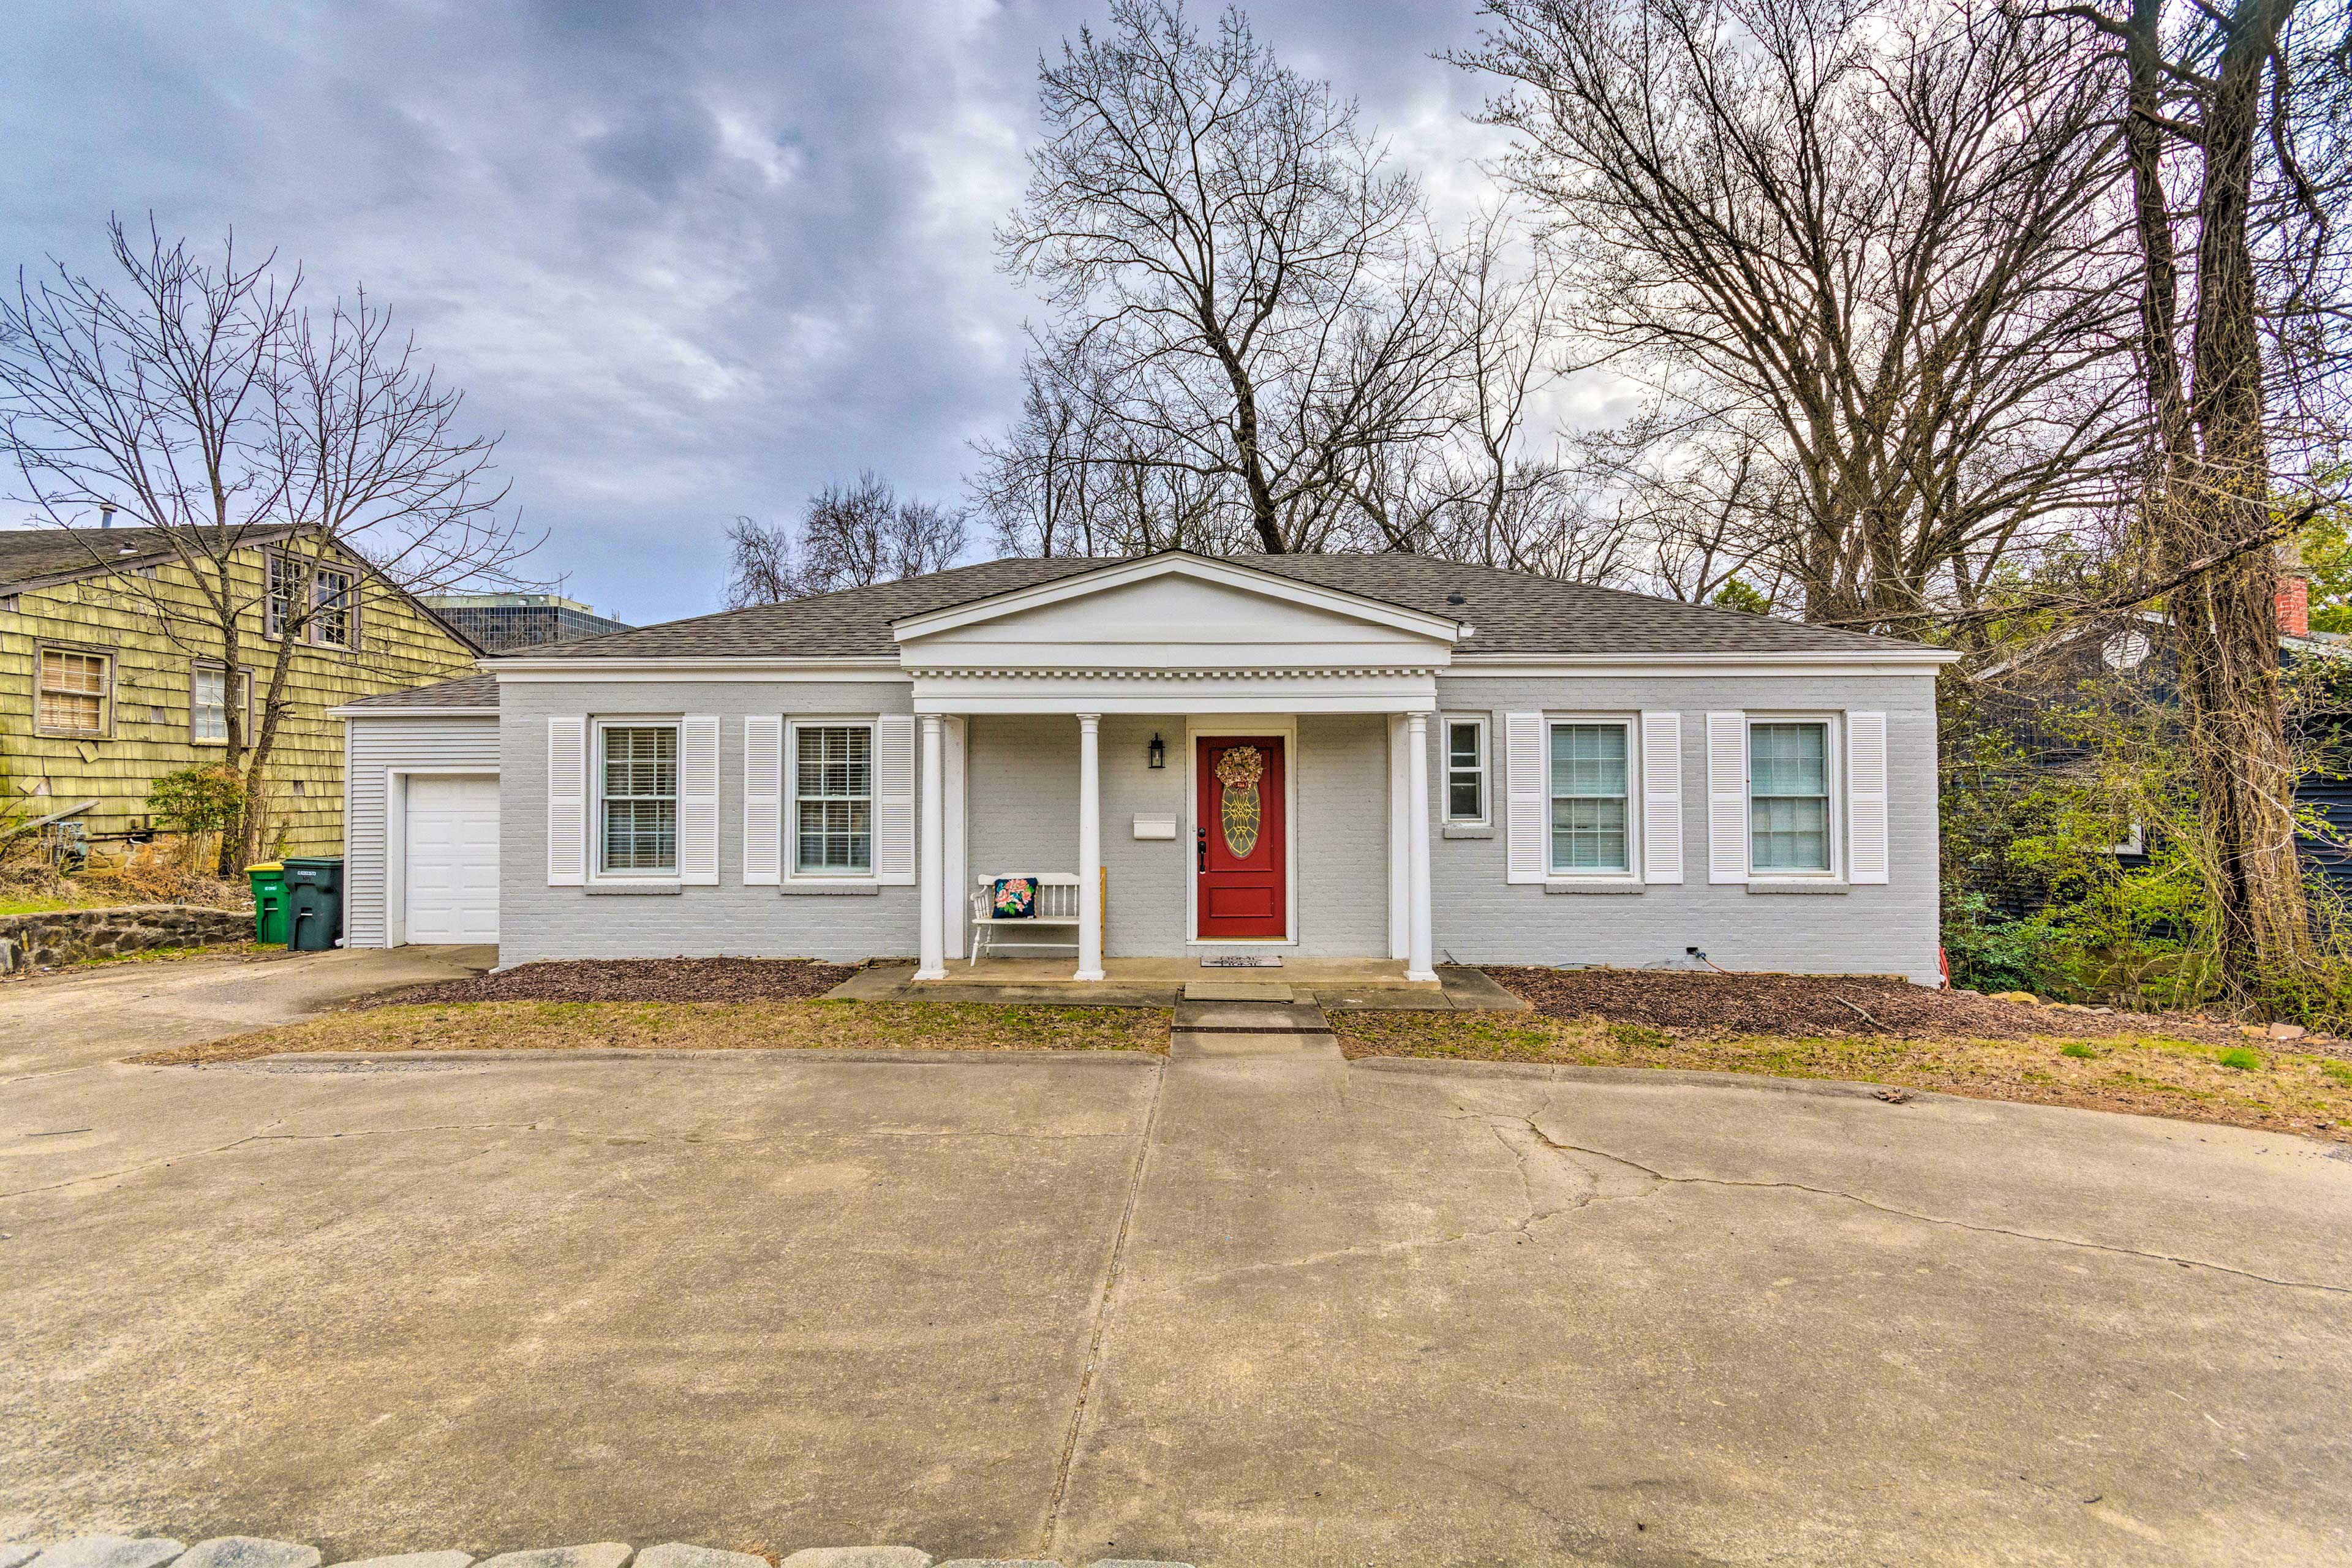 Little Rock Vacation Rental | 3BR | 2BA | 1 Small Step to Enter | 1,797 Sq Ft